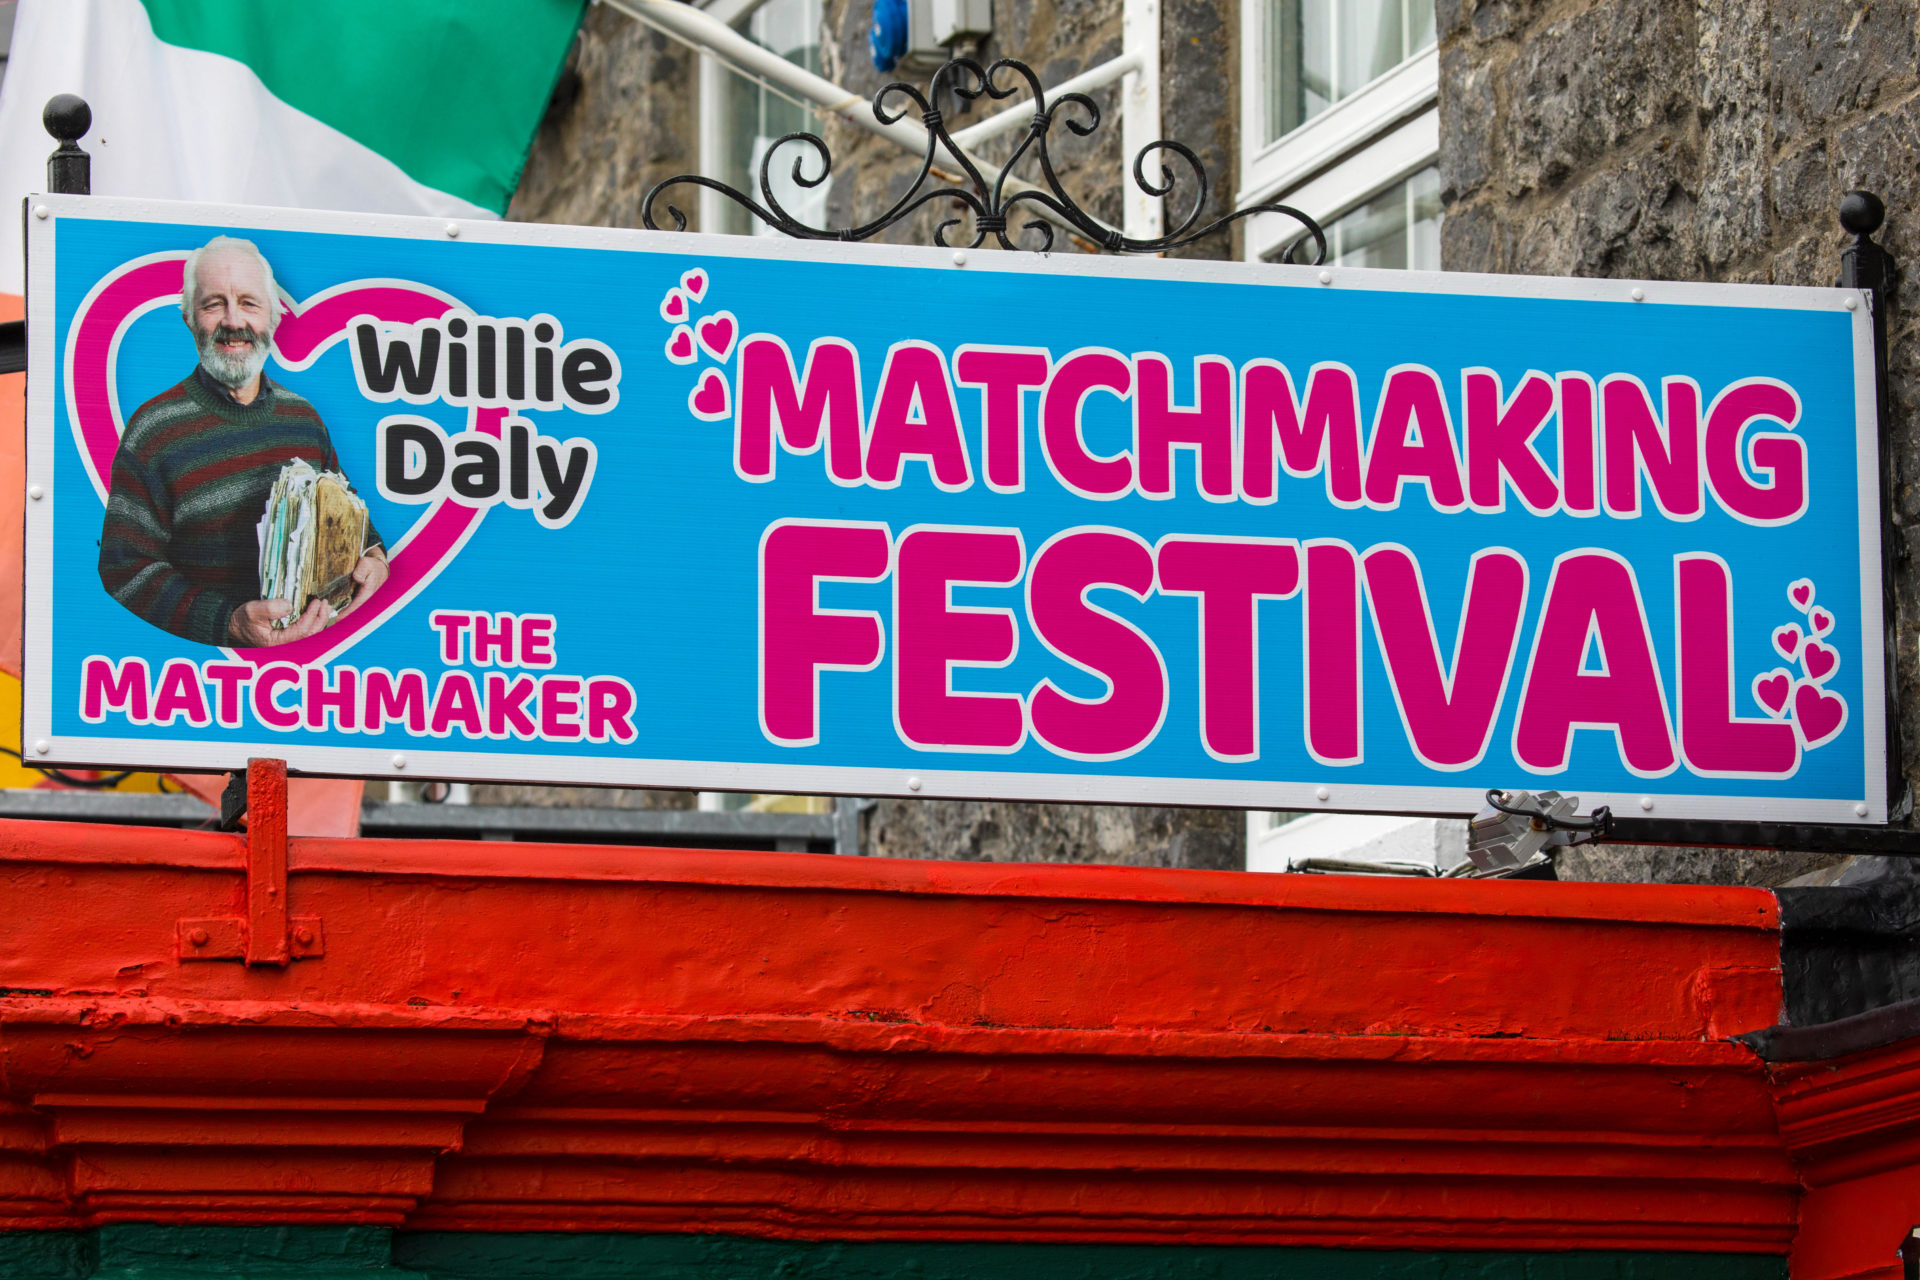 A sign promoting the famous annual Matchmaking Festival